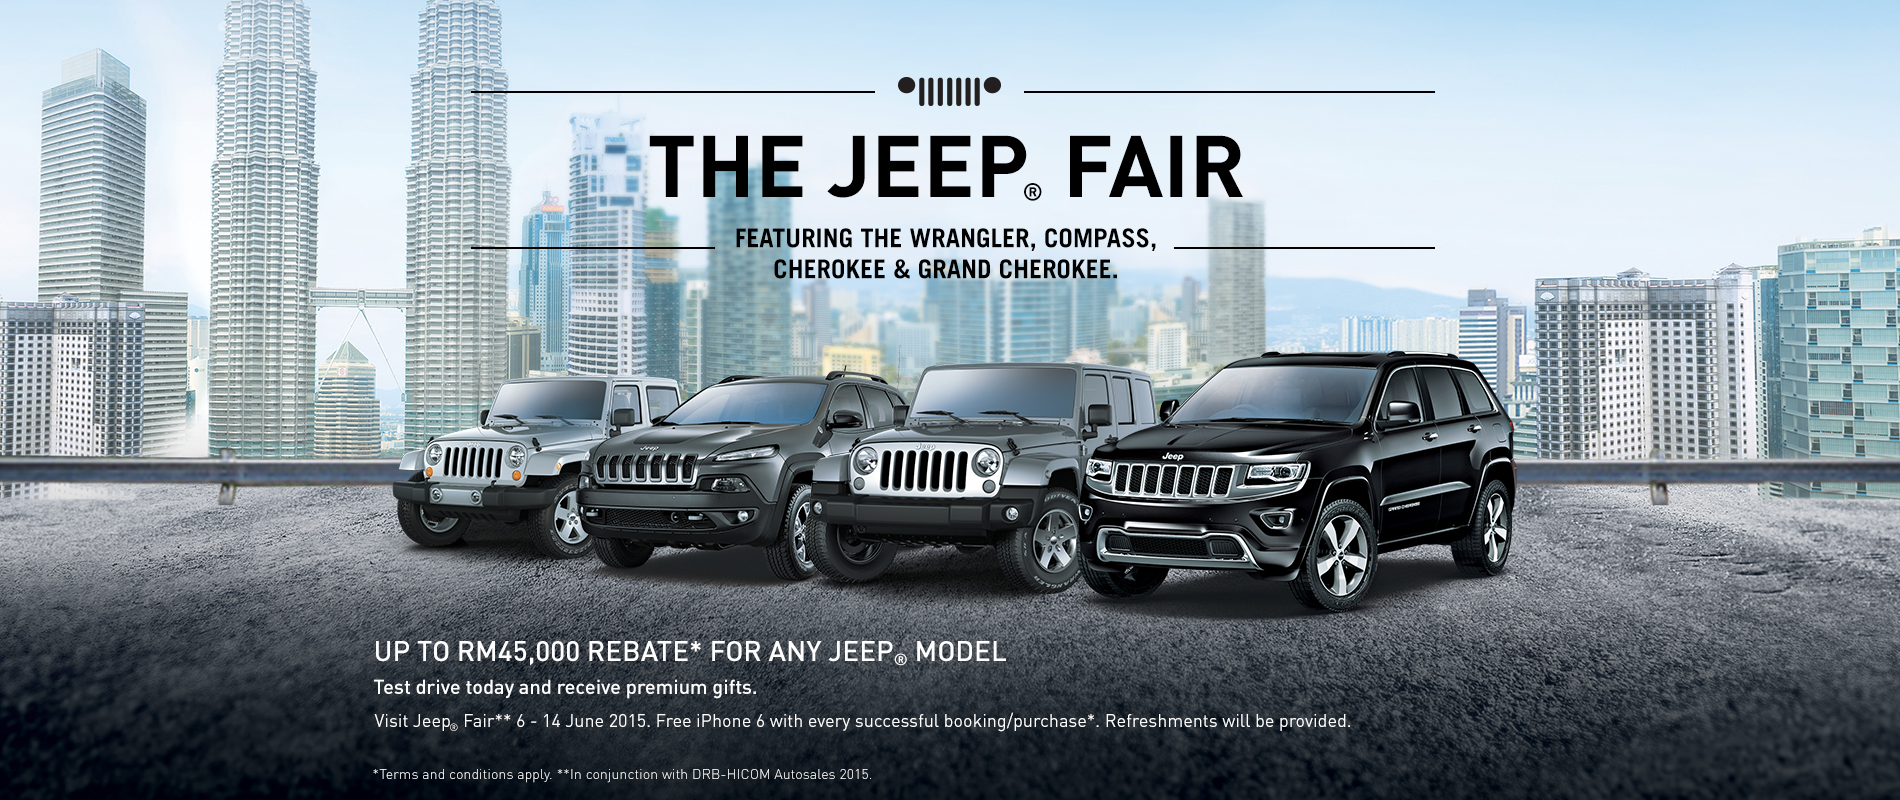 ad-get-up-to-rm45-000-rebate-at-the-jeep-fair-2015-the-jeep-fair